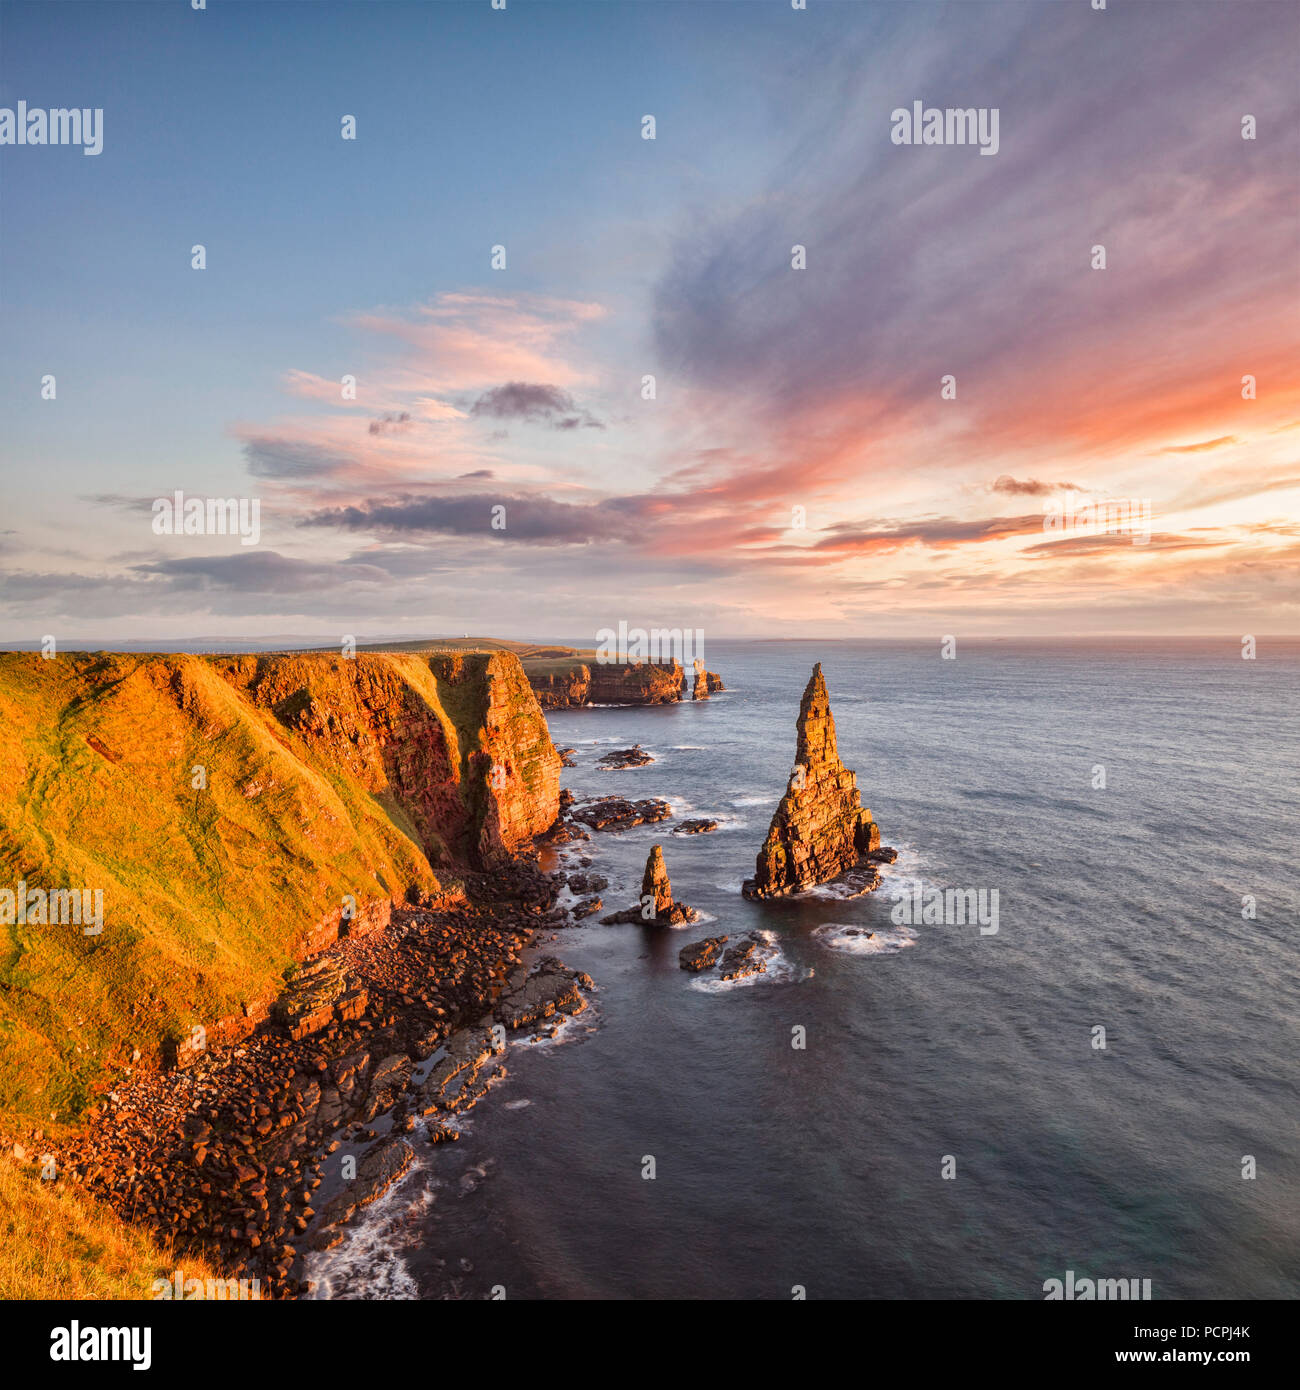 Sunrise at Stacks of Duncansby, Duncansby Head, Caithness, Scotland, UK Stock Photo